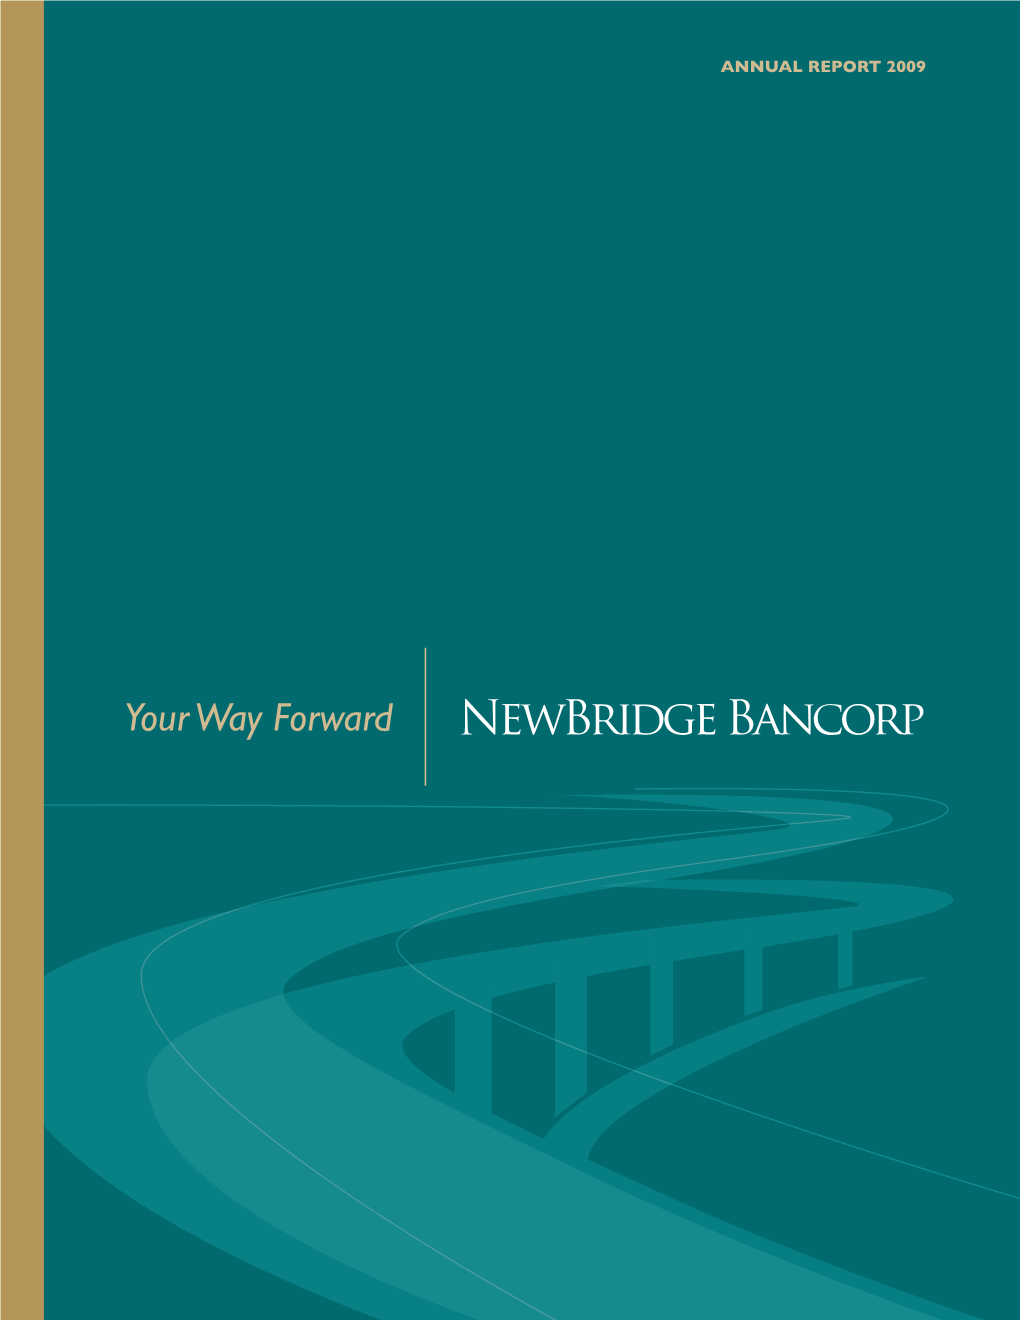 Newbridge Bancorp OUR VISION to Be a High-Performing Community Bank By